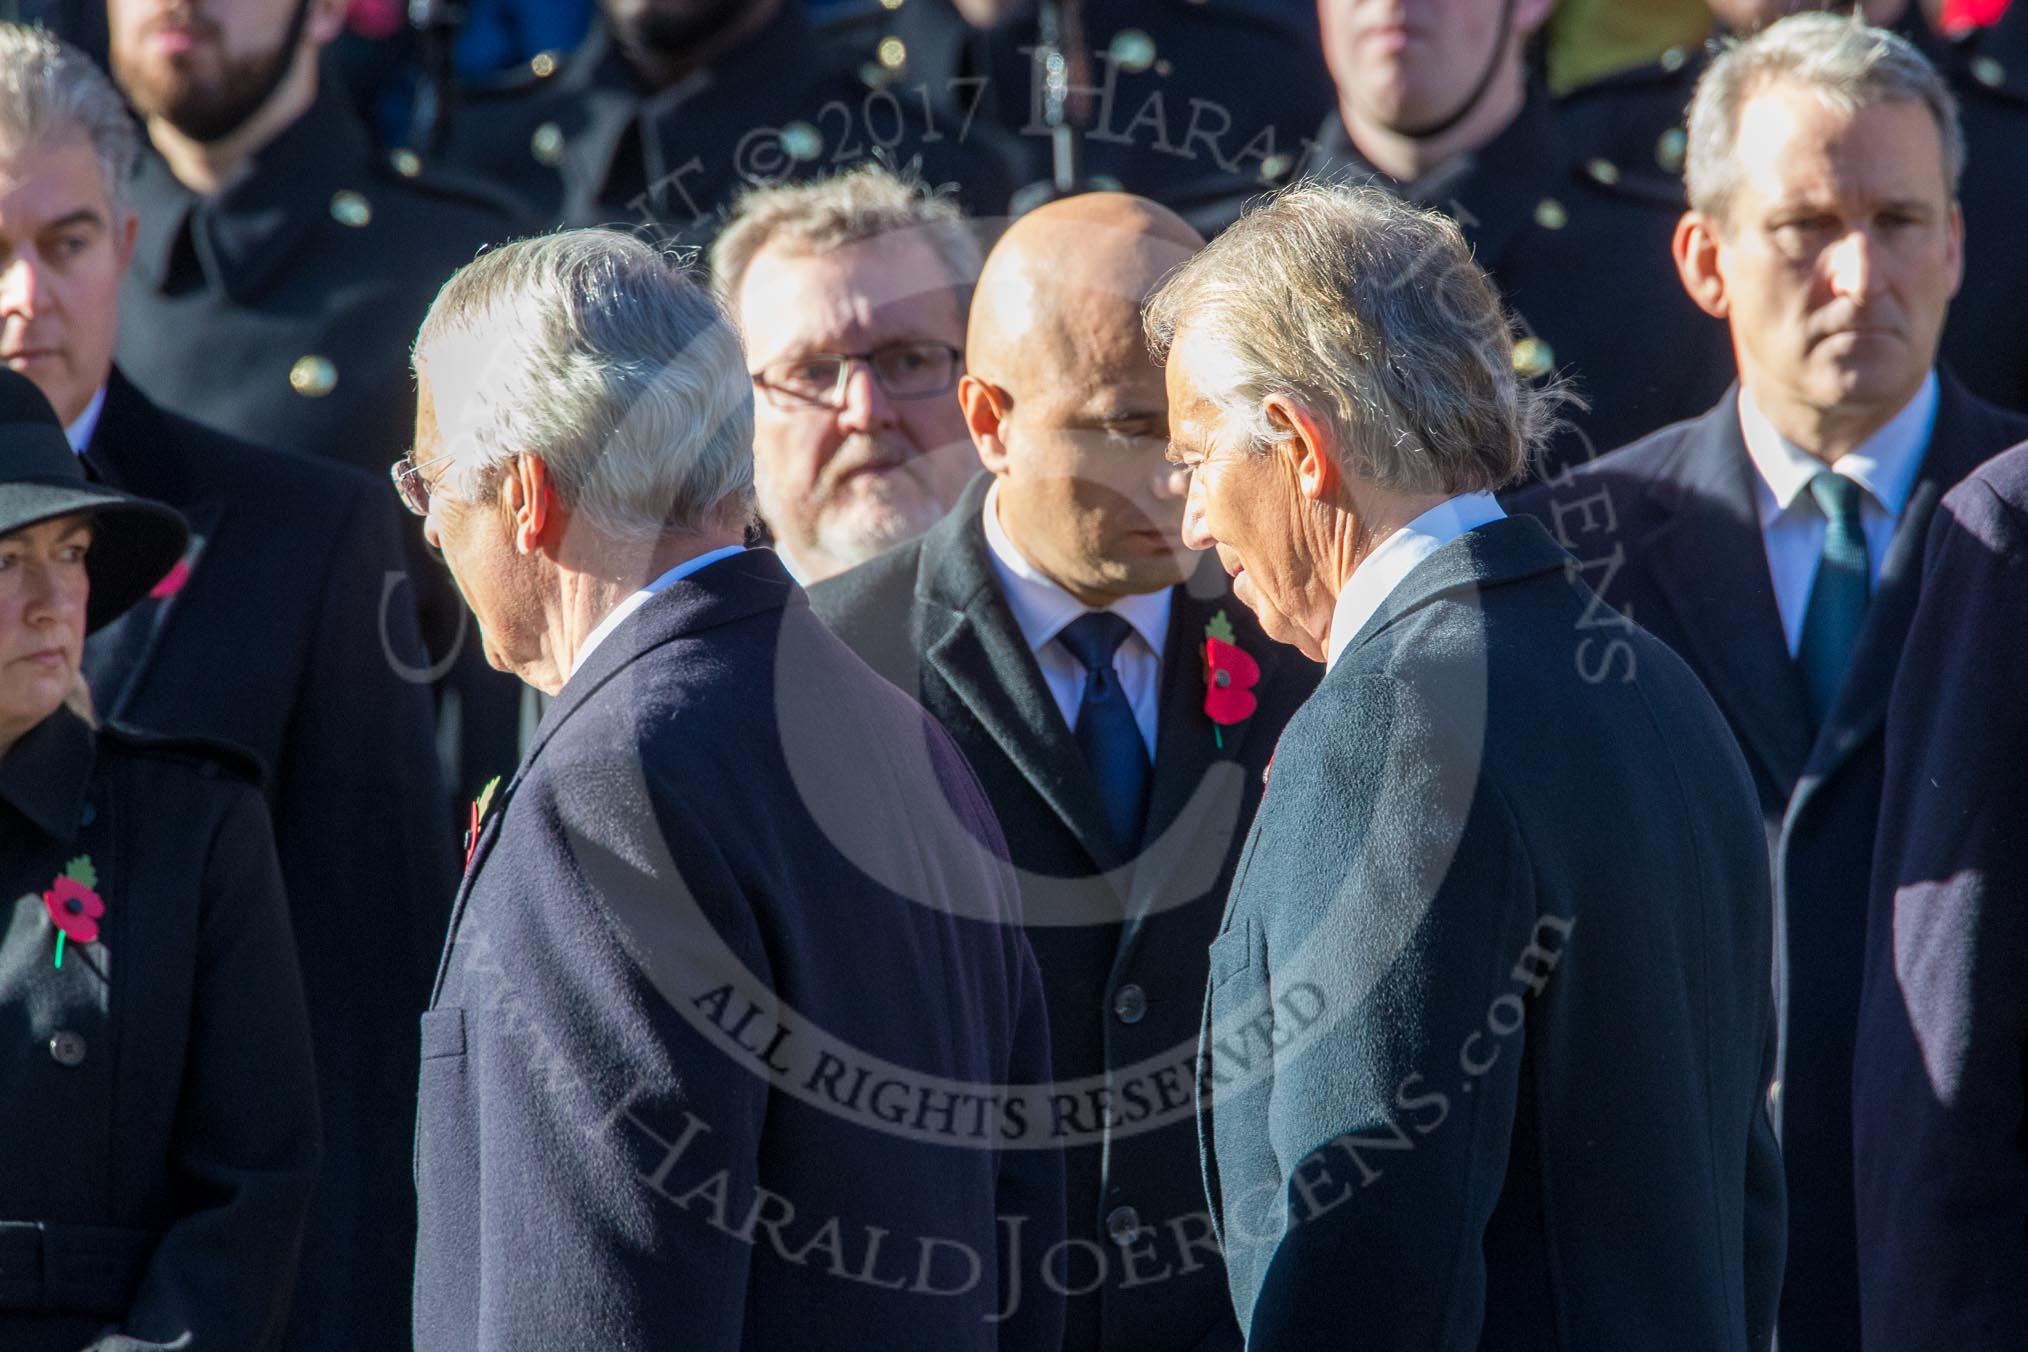 Former prime ministers John Major and Tony Blair returning to the Foreign and Commonwealth Office during Remembrance Sunday Cenotaph Ceremony 2018 at Horse Guards Parade, Westminster, London, 11 November 2018, 11:25.